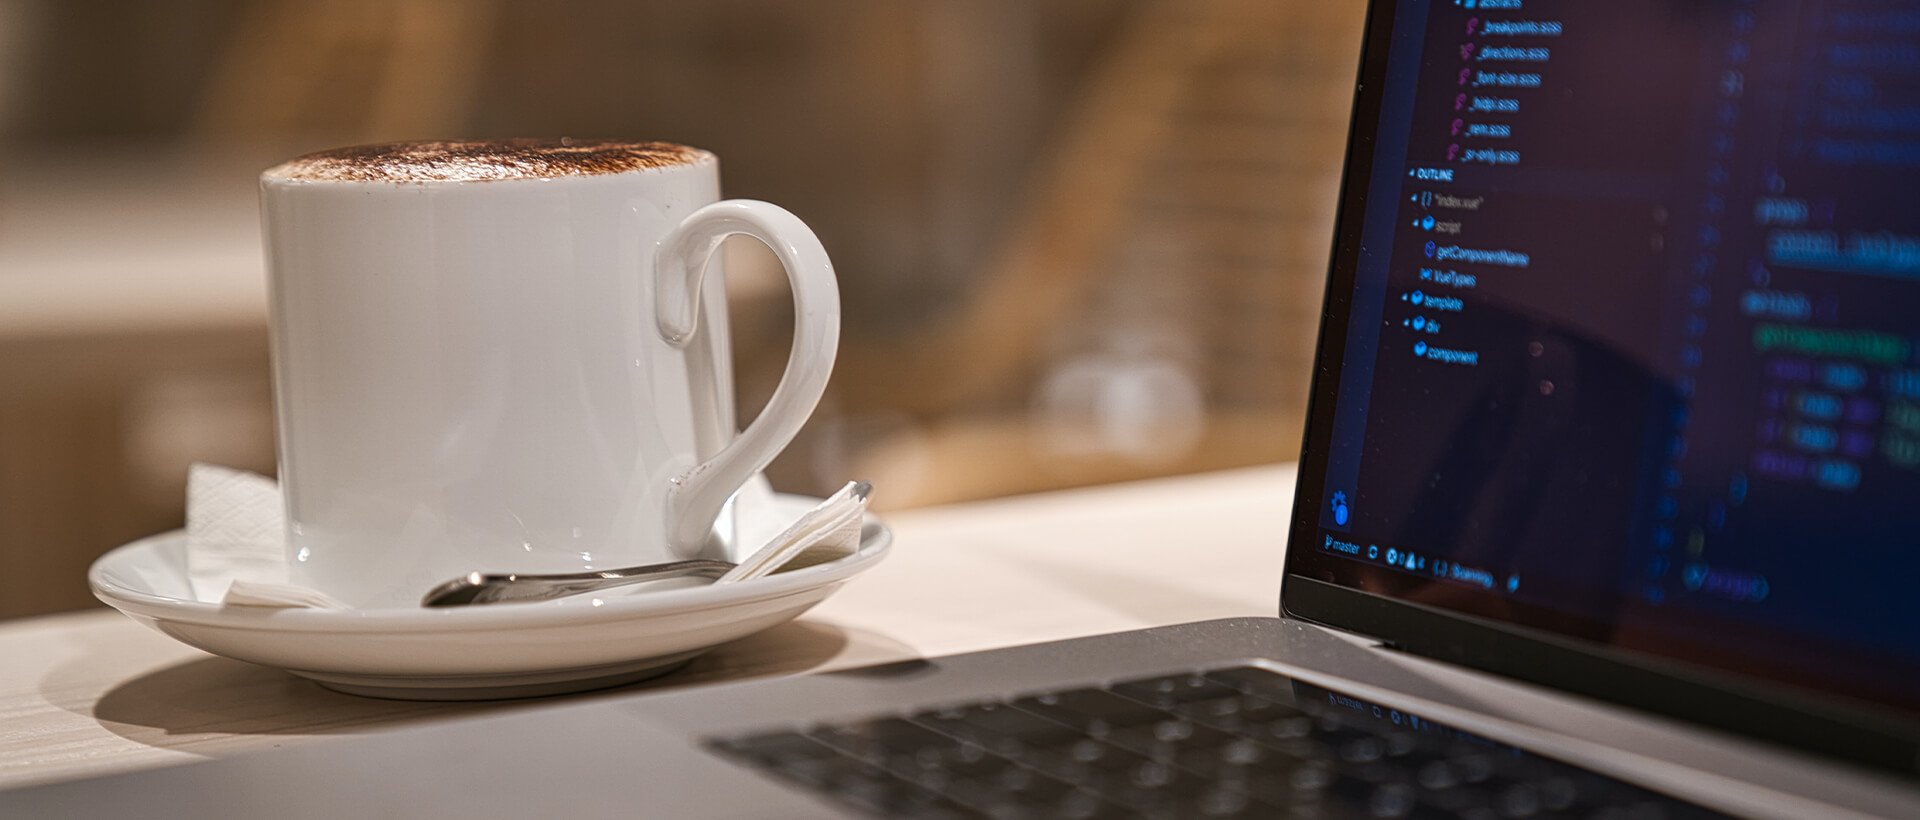 a cup of coffee sitting next to a laptop computer.